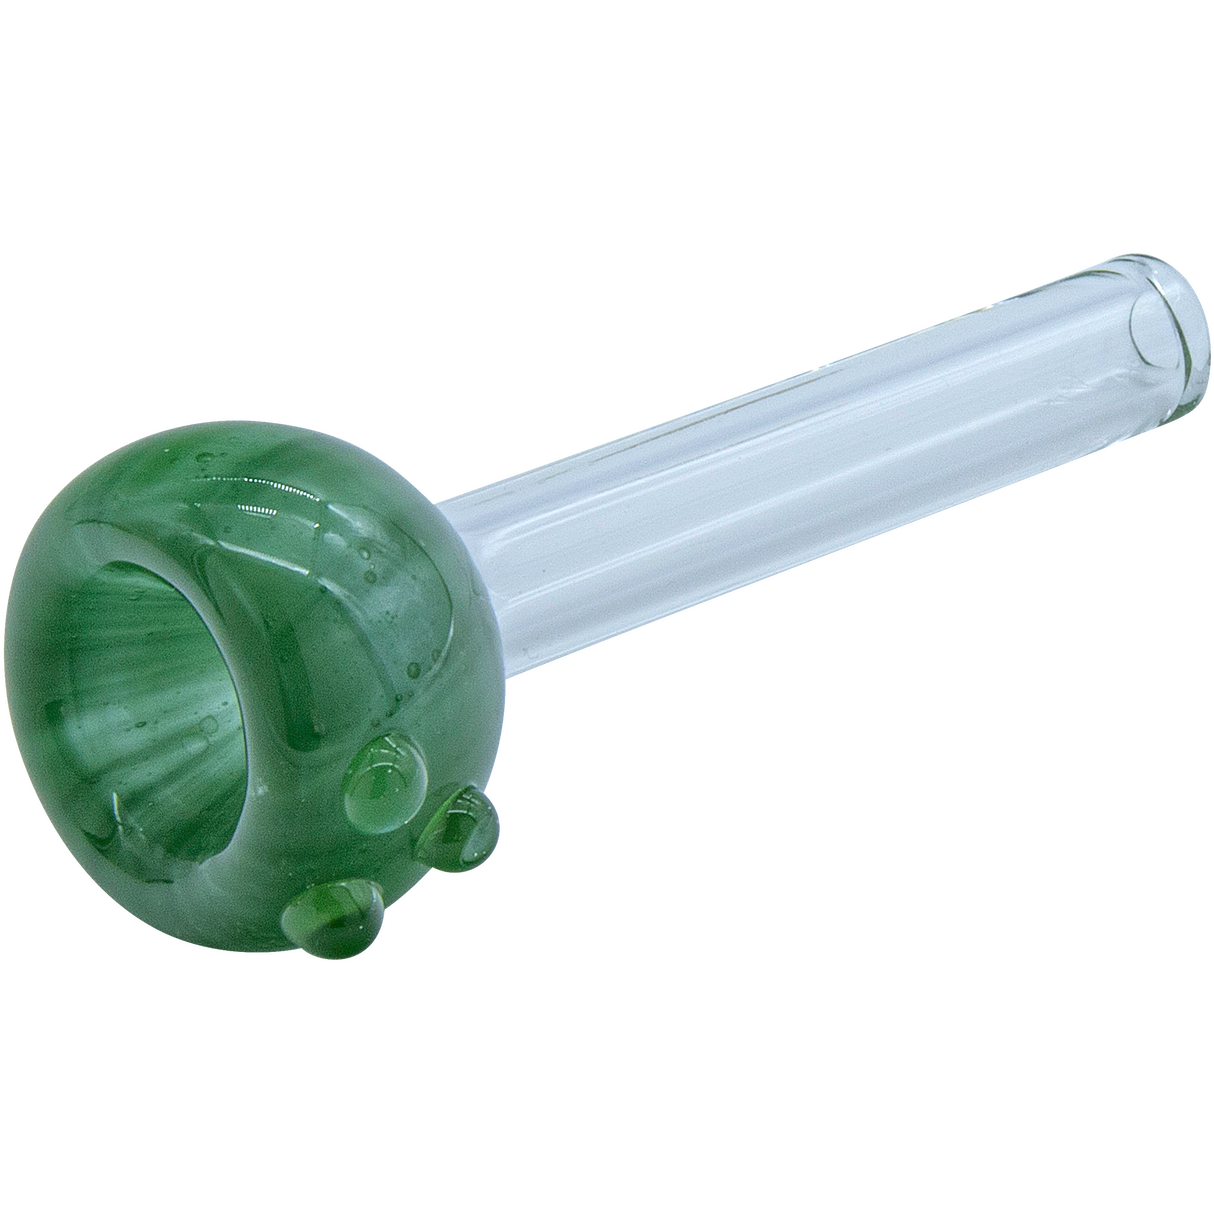 LA Pipes Candy Colored Pull-Stem Slide in Forest Green for Bongs, Borosilicate Glass